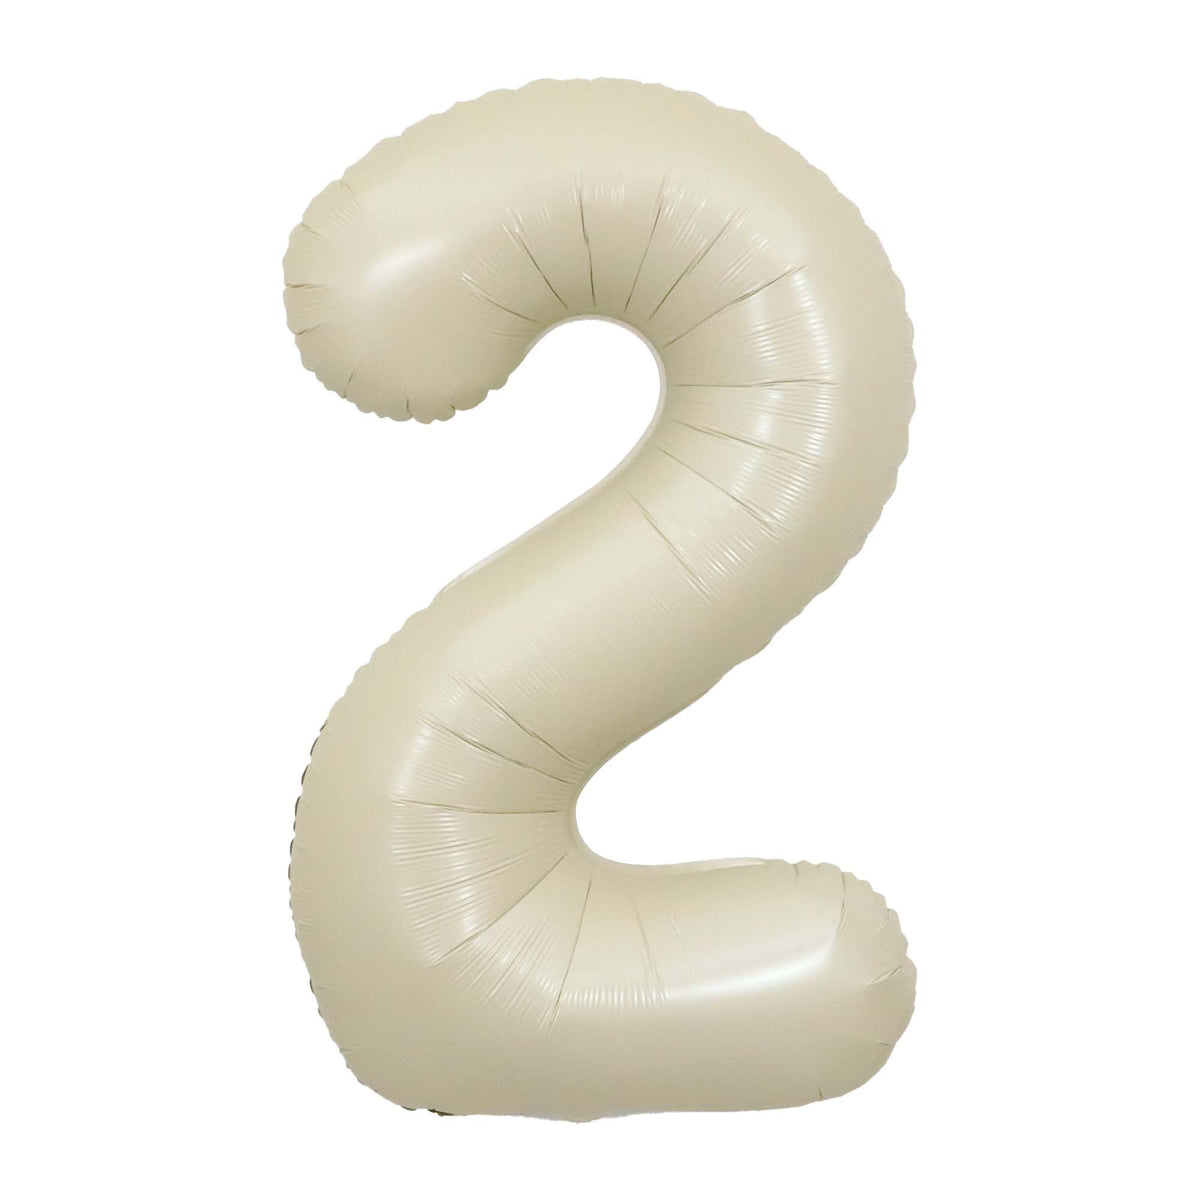 PARTYGRAM Balloons Ivory Number 2 Foil Balloon, Creamy White Matte Finish, 34 Inches 810077658260